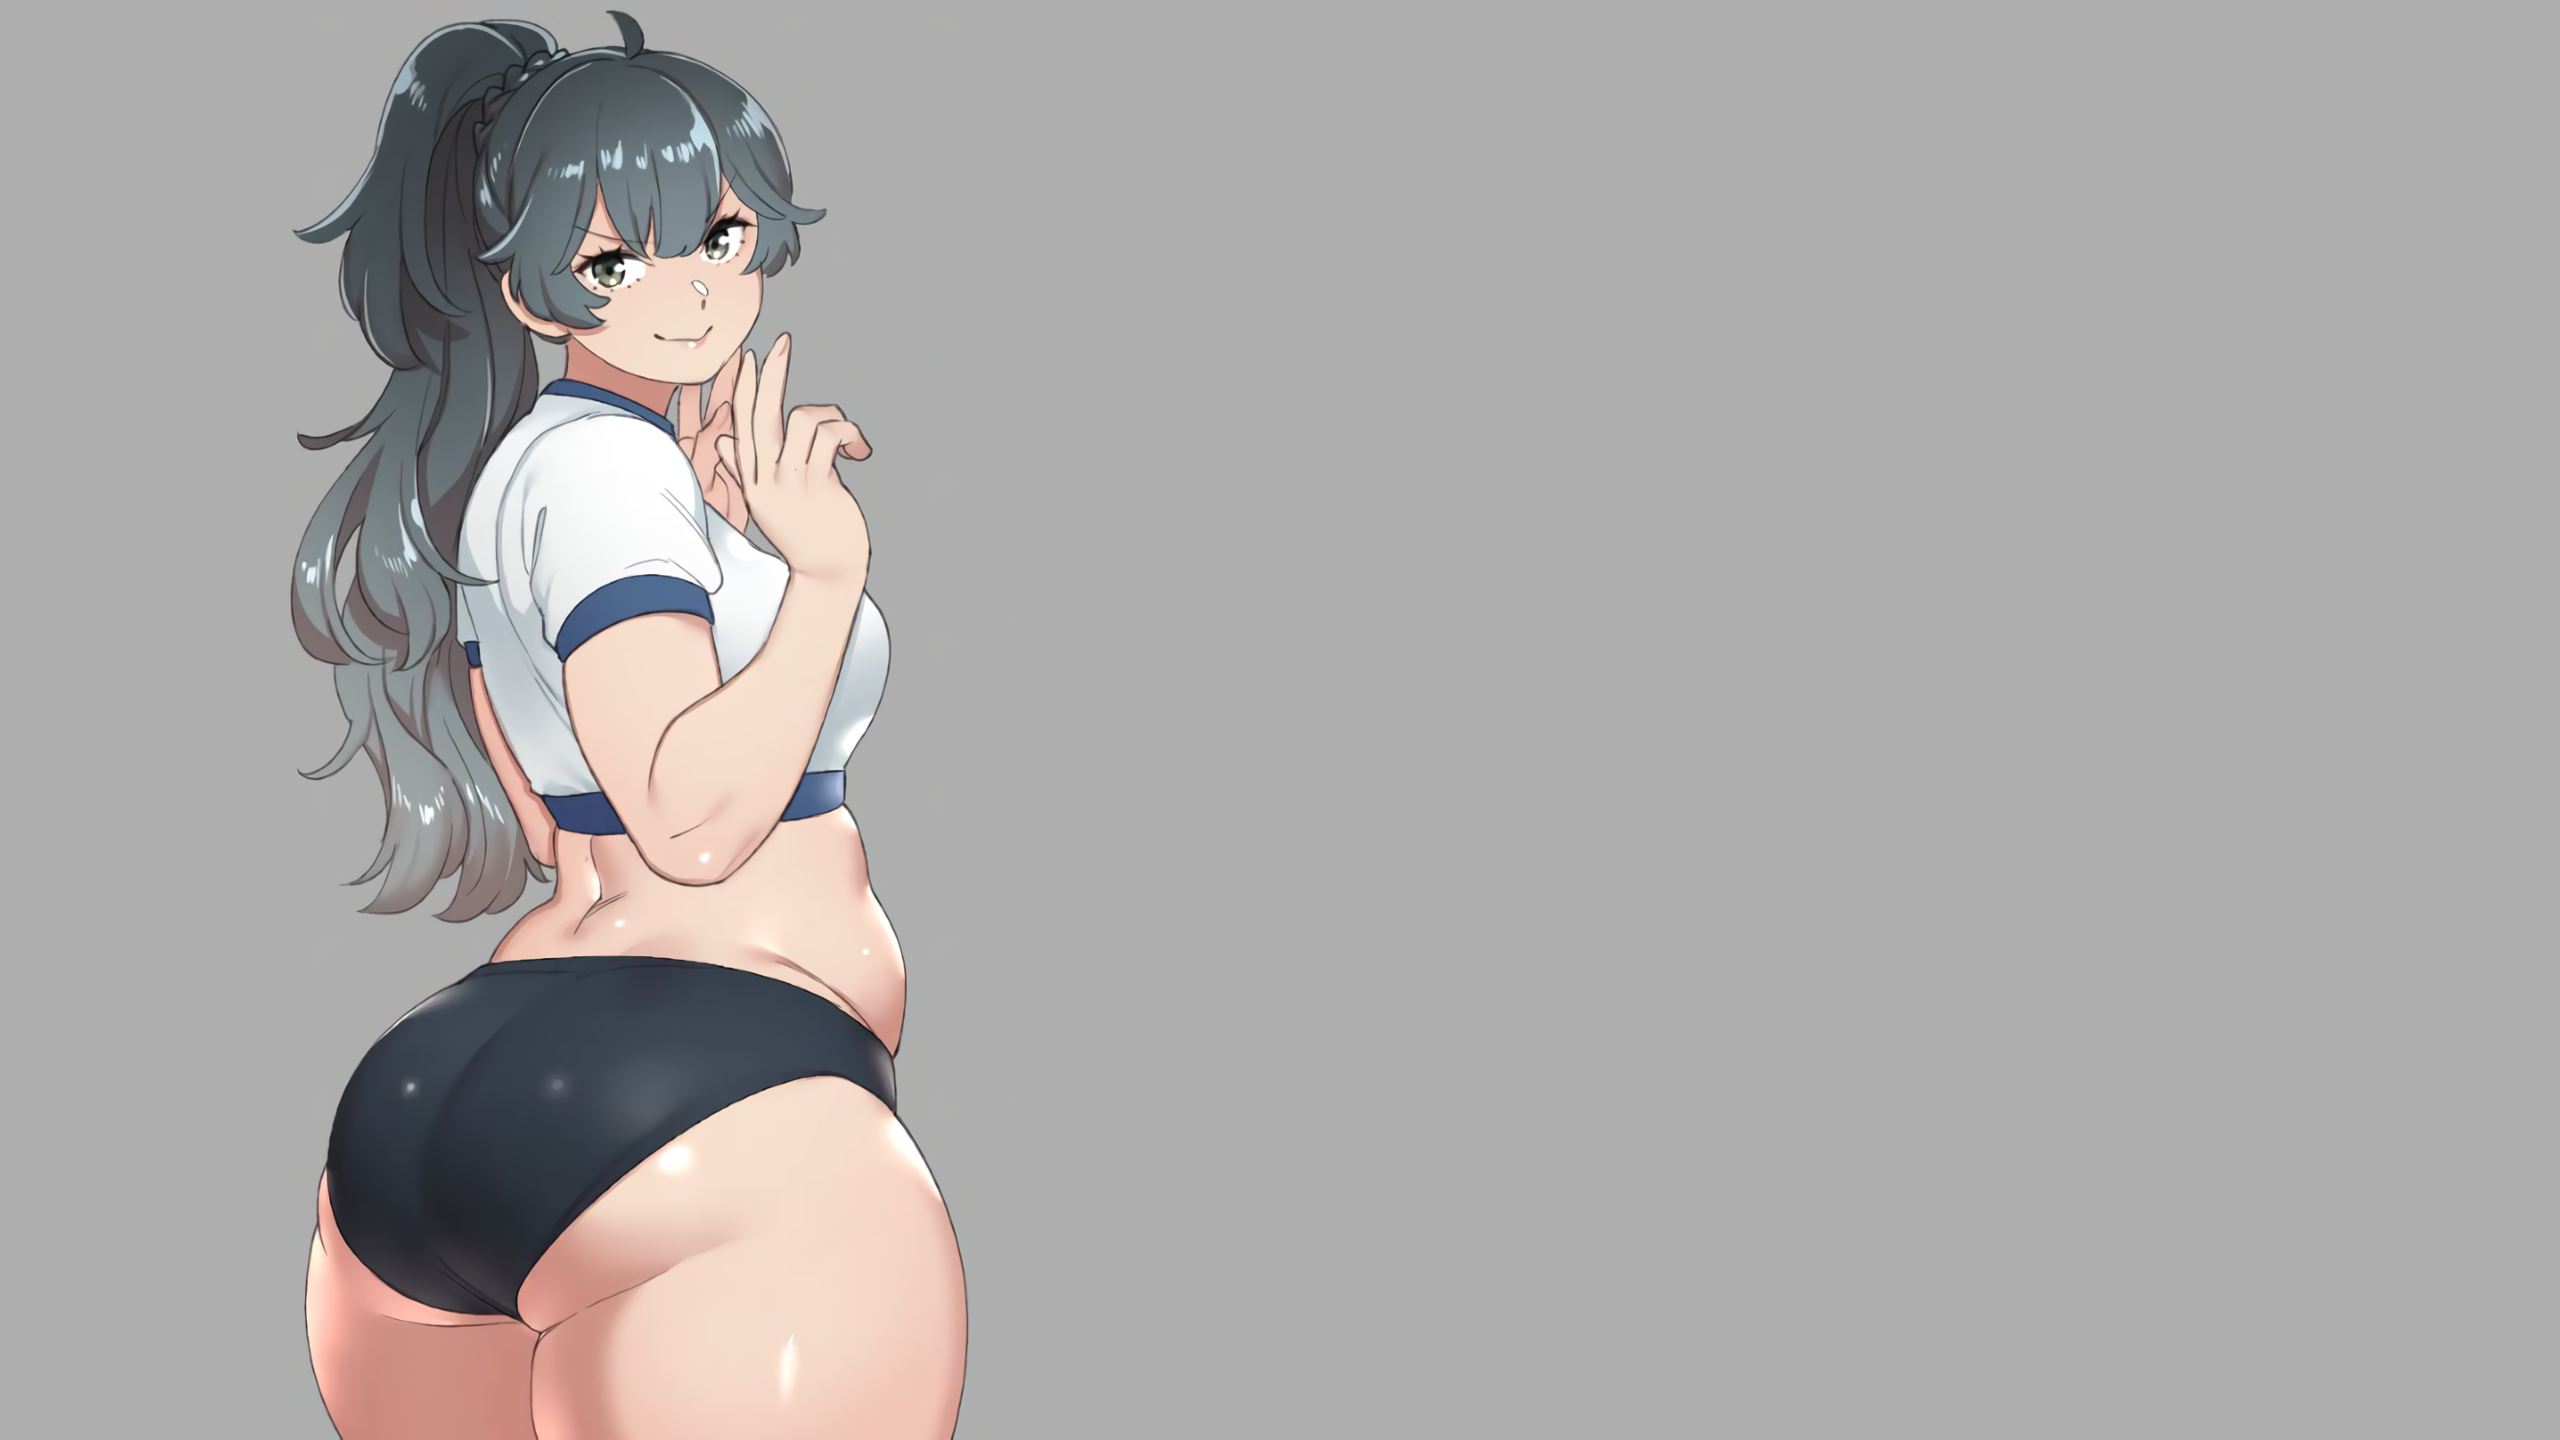 Anime 2560x1440 anime anime girls ecchi simple background ass thick ass thighs thigh-highs thick thigh big boobs boobs gym clothes ponytail schoolgirl Agawa Ryo